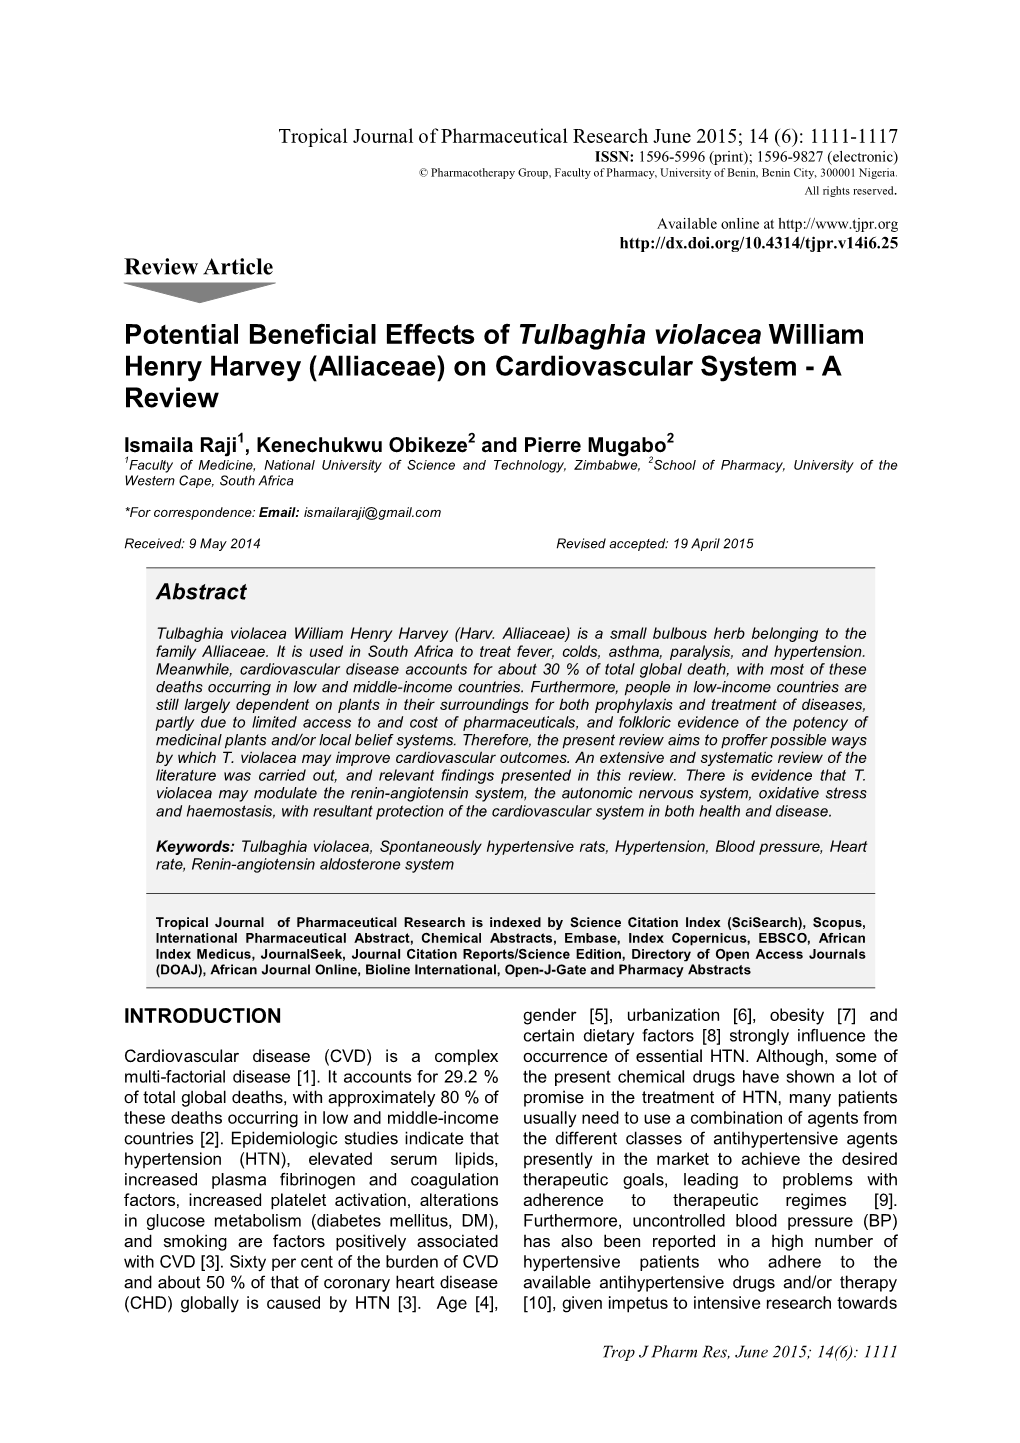 Potential Beneficial Effects of Tulbaghia Violacea William Henry Harvey (Alliaceae) on Cardiovascular System - a Review